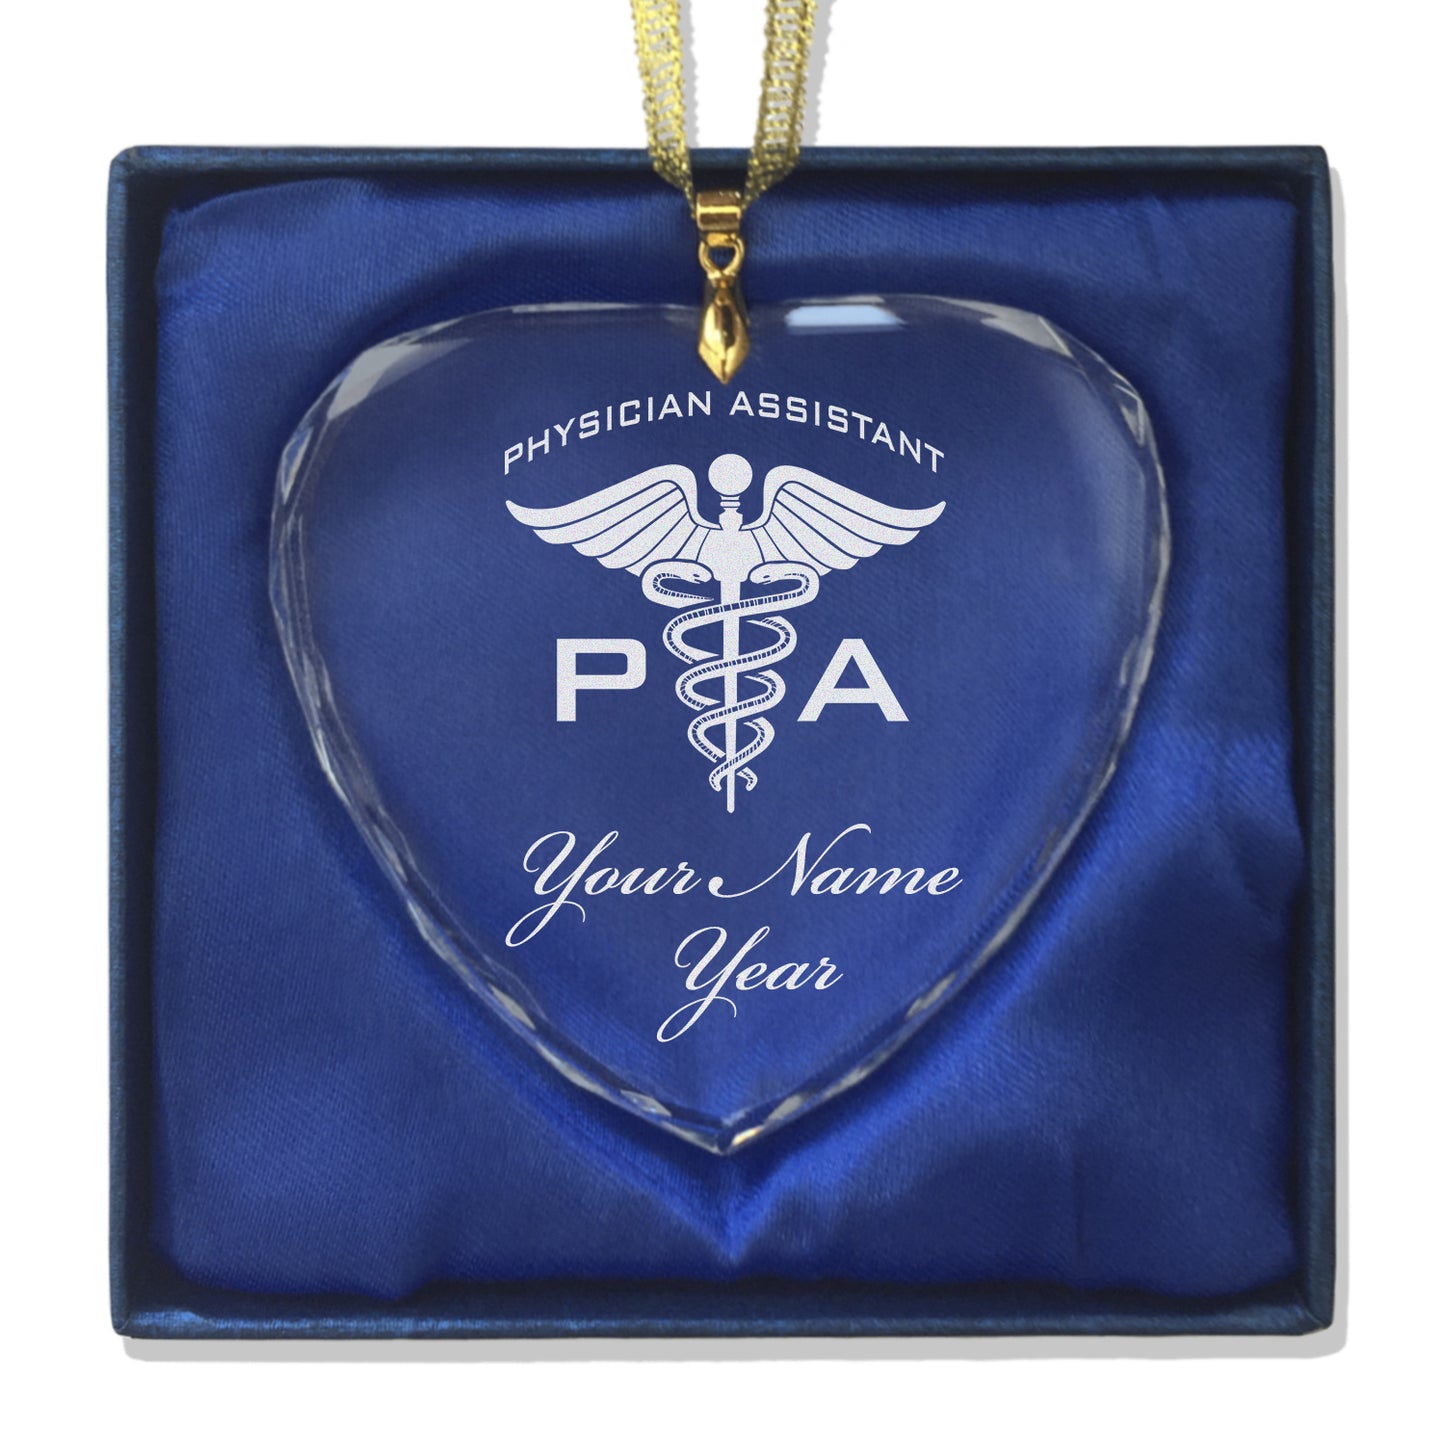 LaserGram Christmas Ornament, PA Physician Assistant, Personalized Engraving Included (Heart Shape)